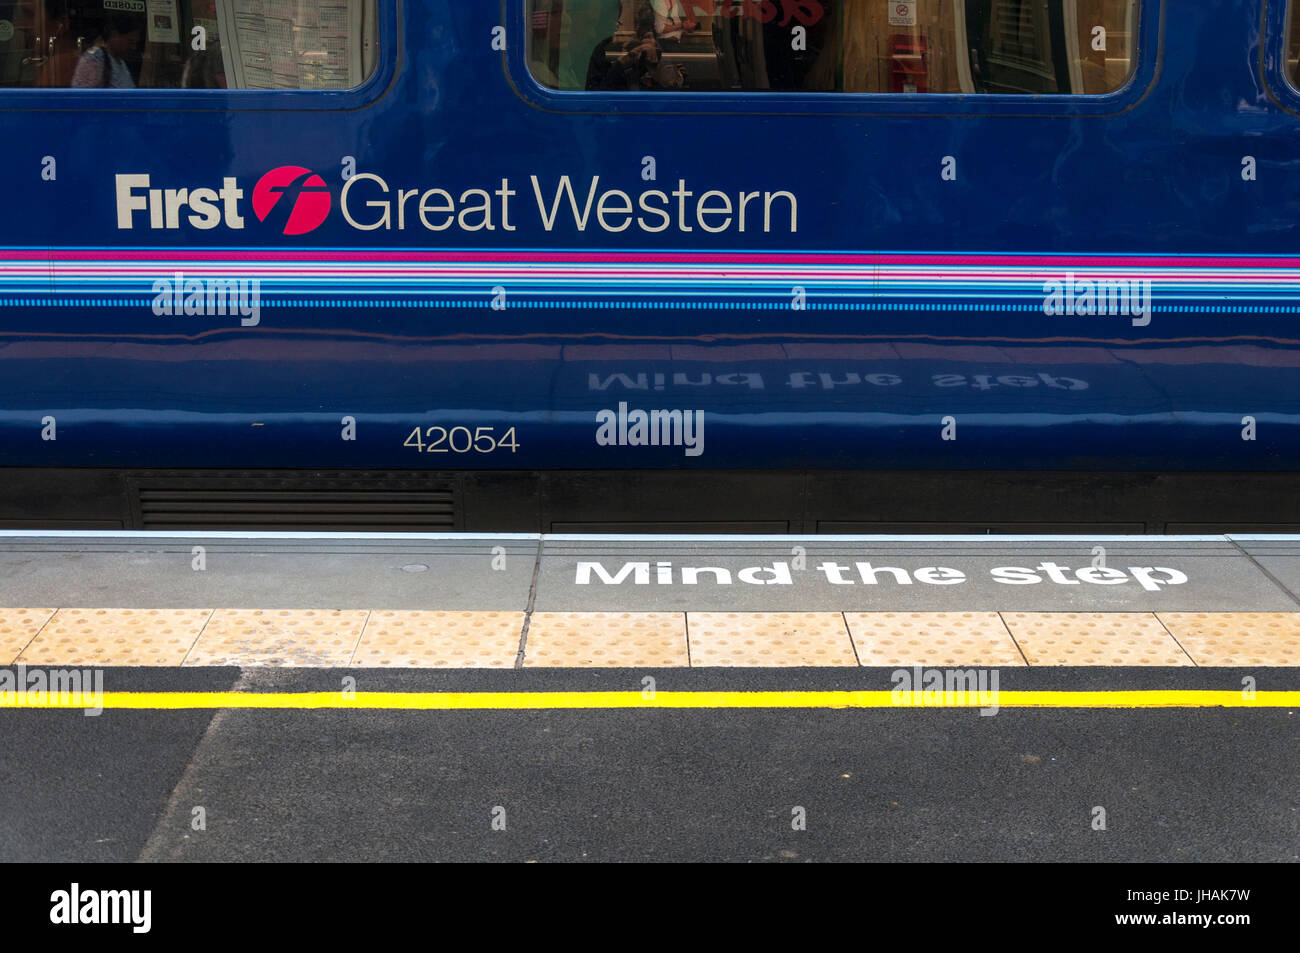 Mind the Step safety warning and a First Great Western train at Bath Spa railway station, Somerset, England, UK Stock Photo